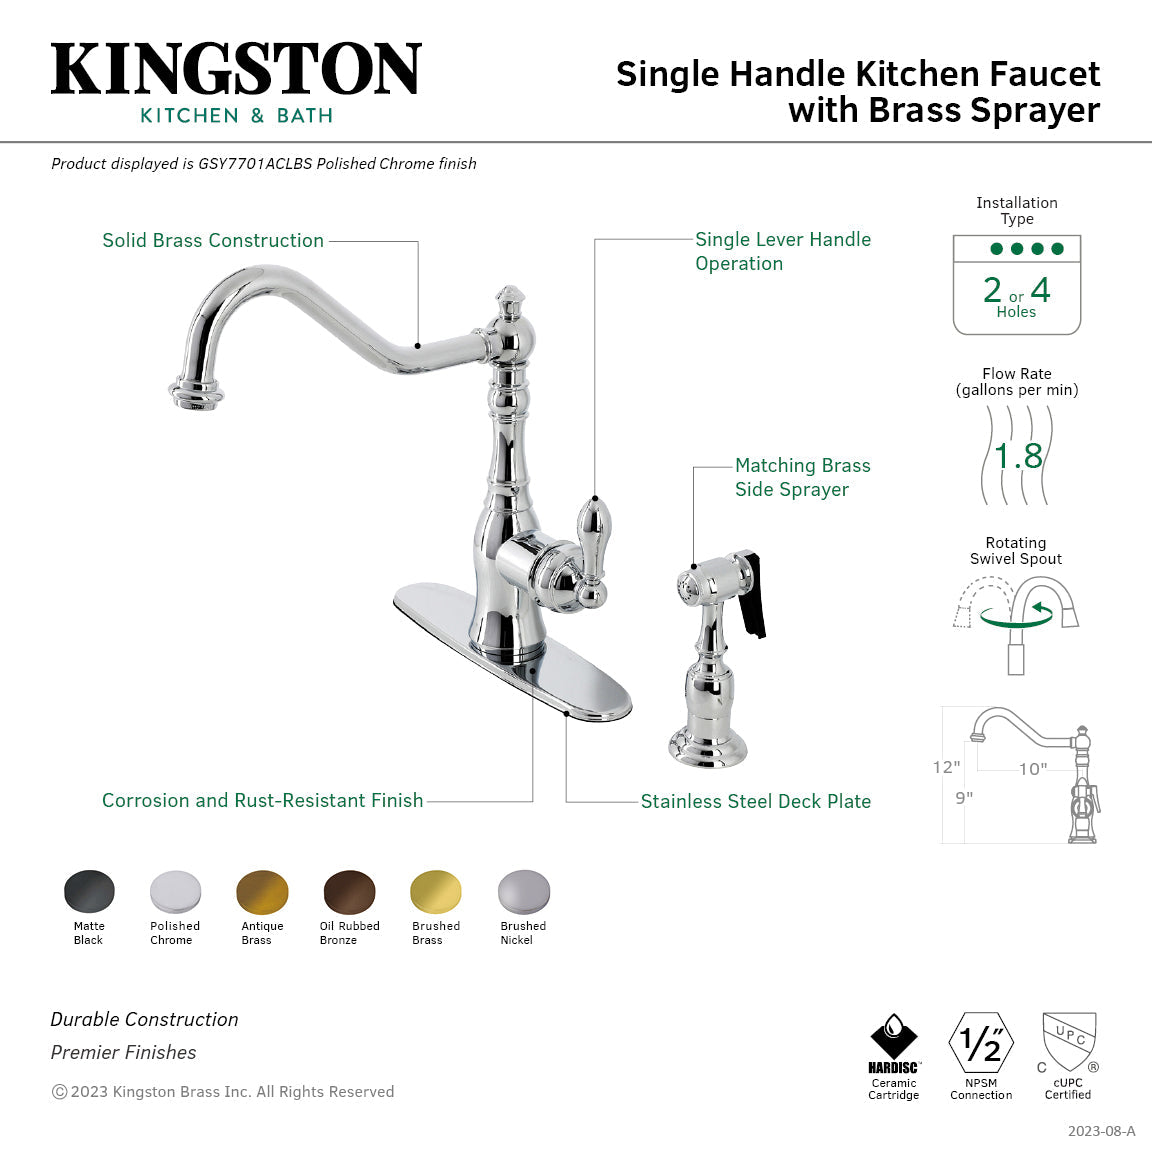 American Classic GSY7708ACLBS Single-Handle 2-or-4 Hole Deck Mount Kitchen Faucet with Brass Sprayer, Brushed Nickel